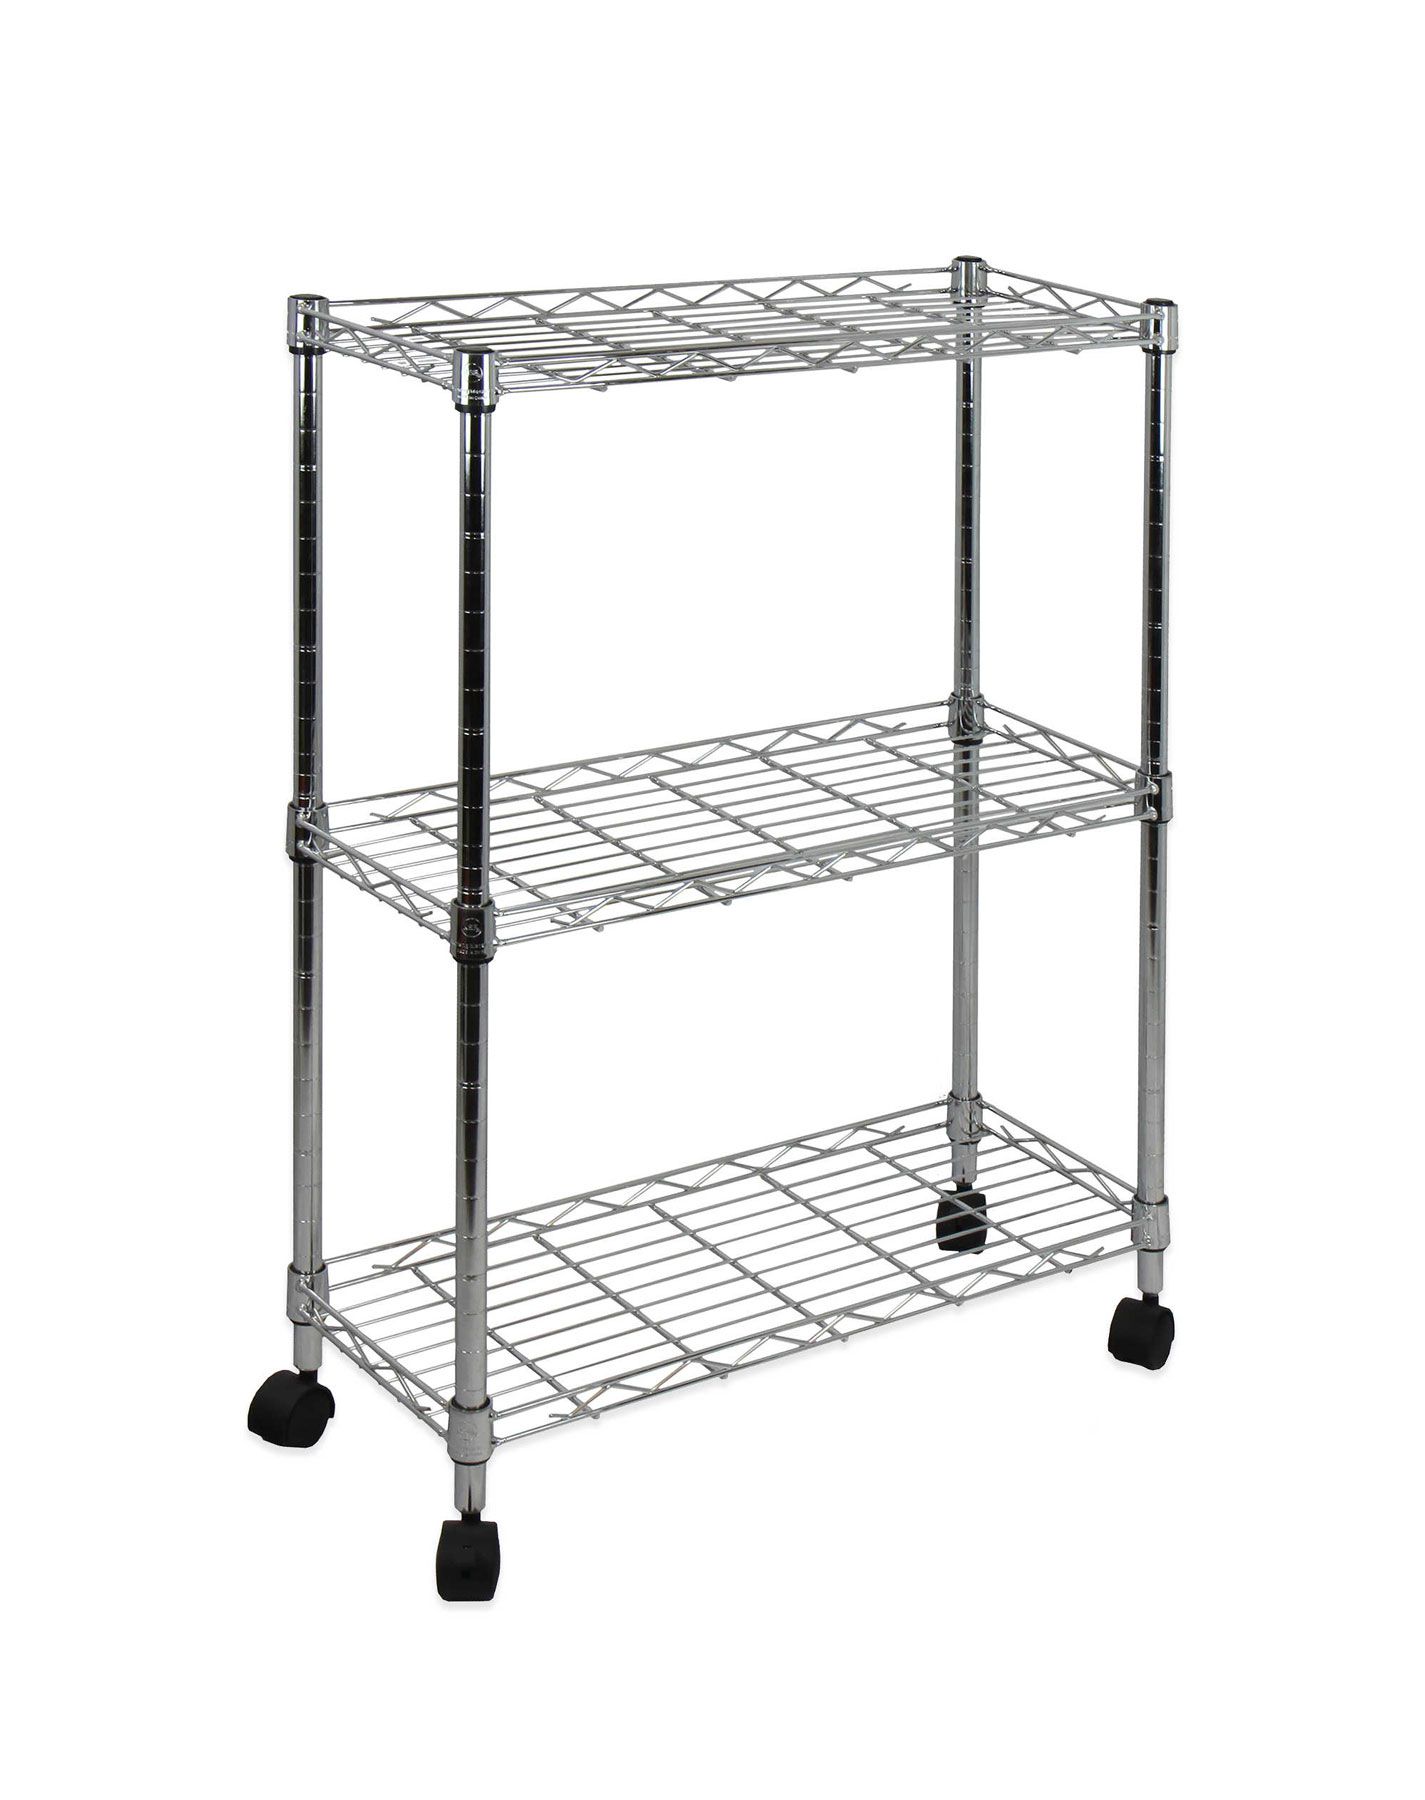 Less than $30: Oceanstar 3-Tier Shelving All-Purpose Utility Cart in Chrome